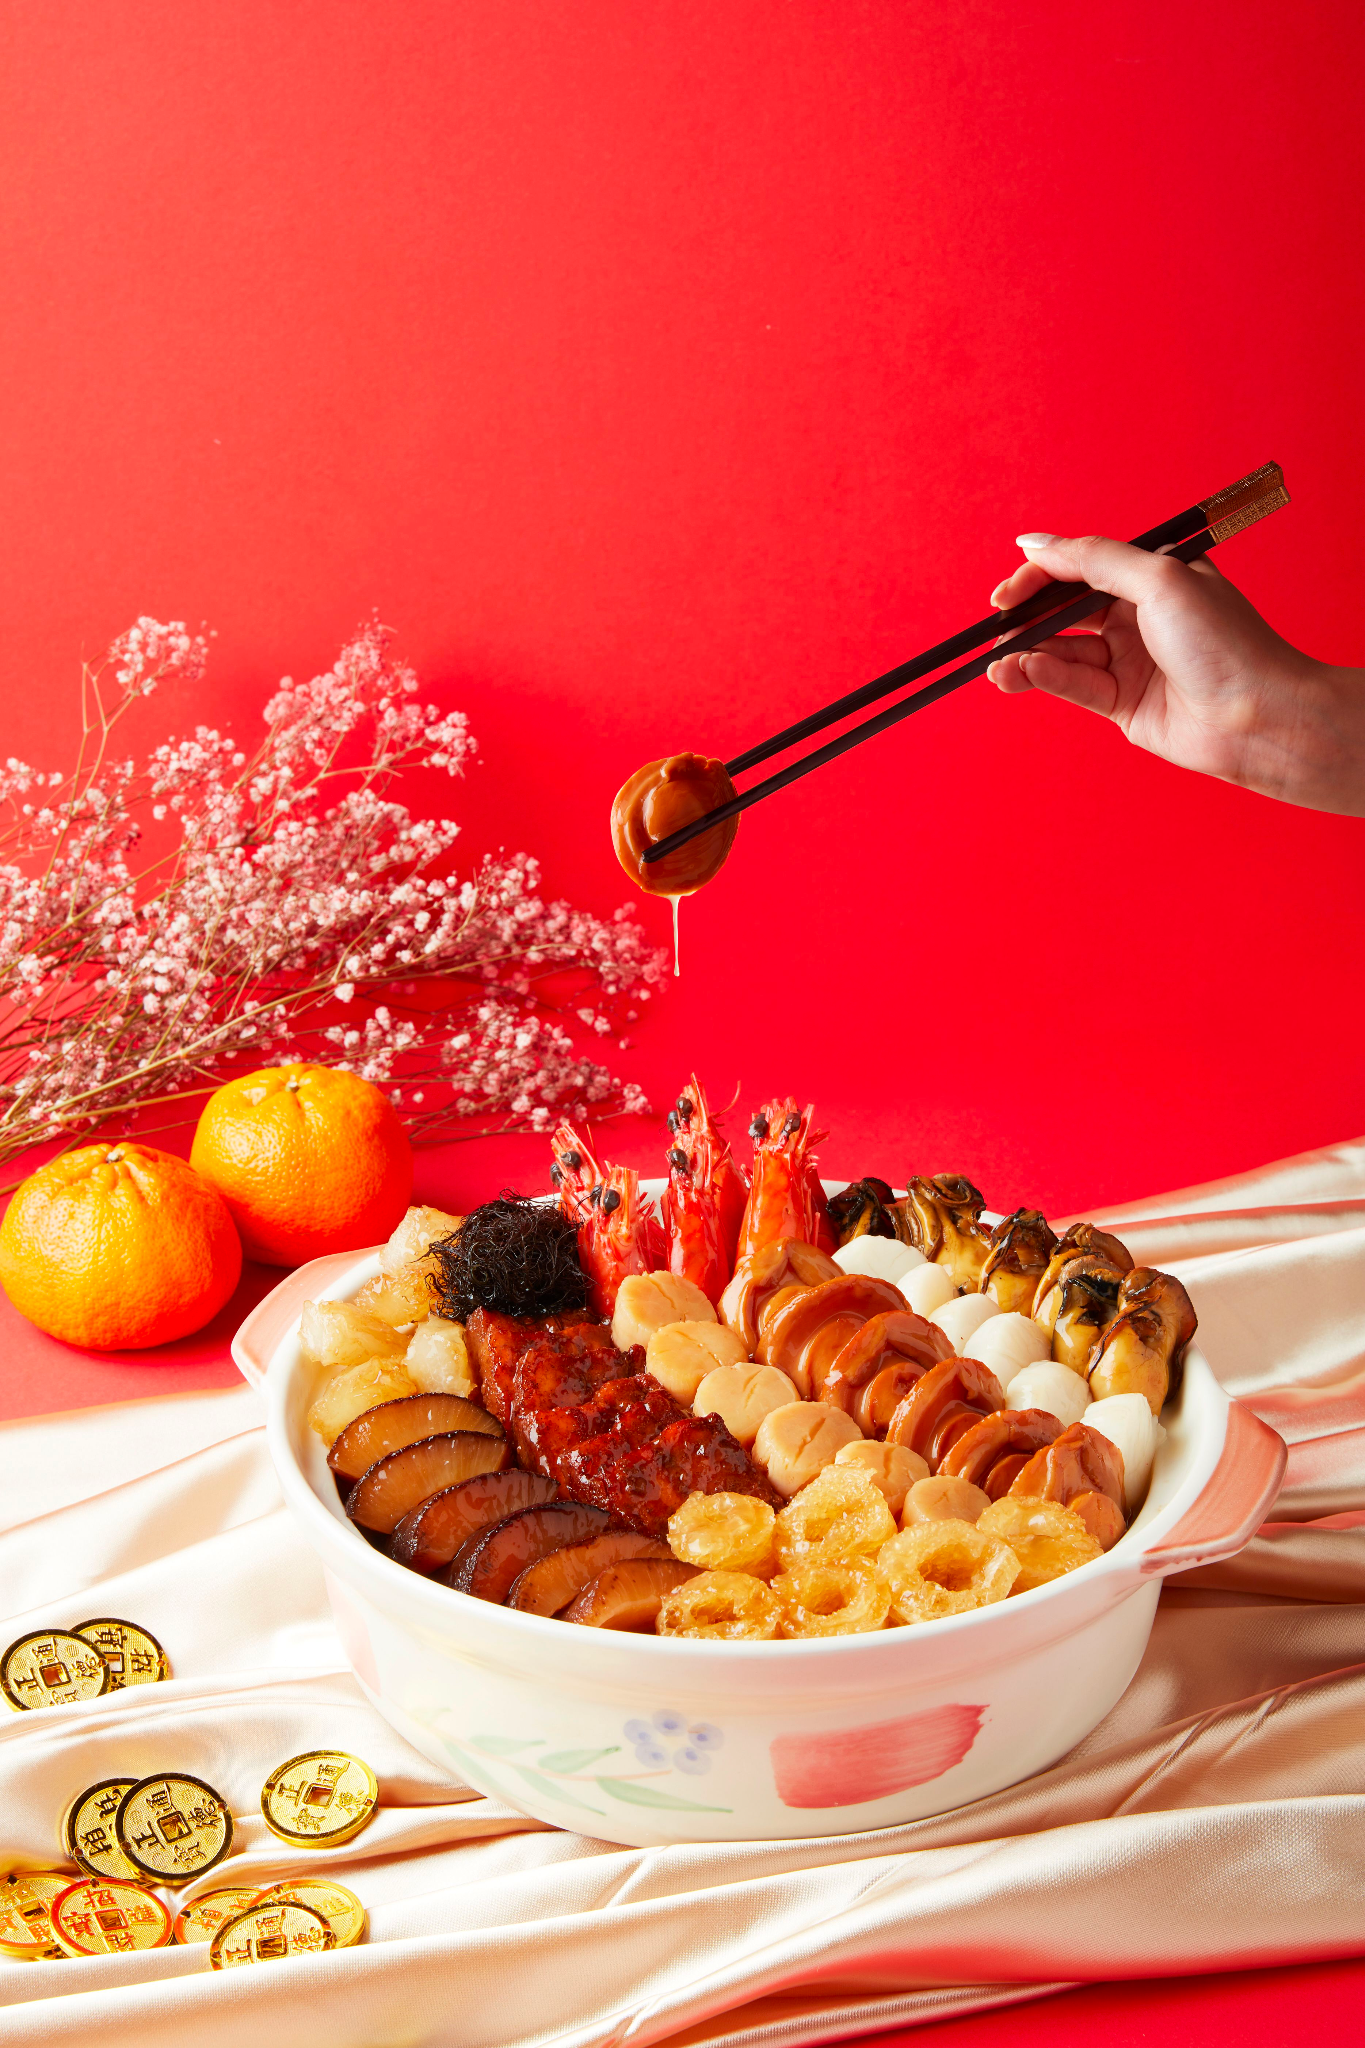 Lobang: MORE THAN 50 CNY 2023 F&B Deals - Your one stop guide to Yusheng, Pen Cai, Set Menus and more this Lunar New Year! - 51